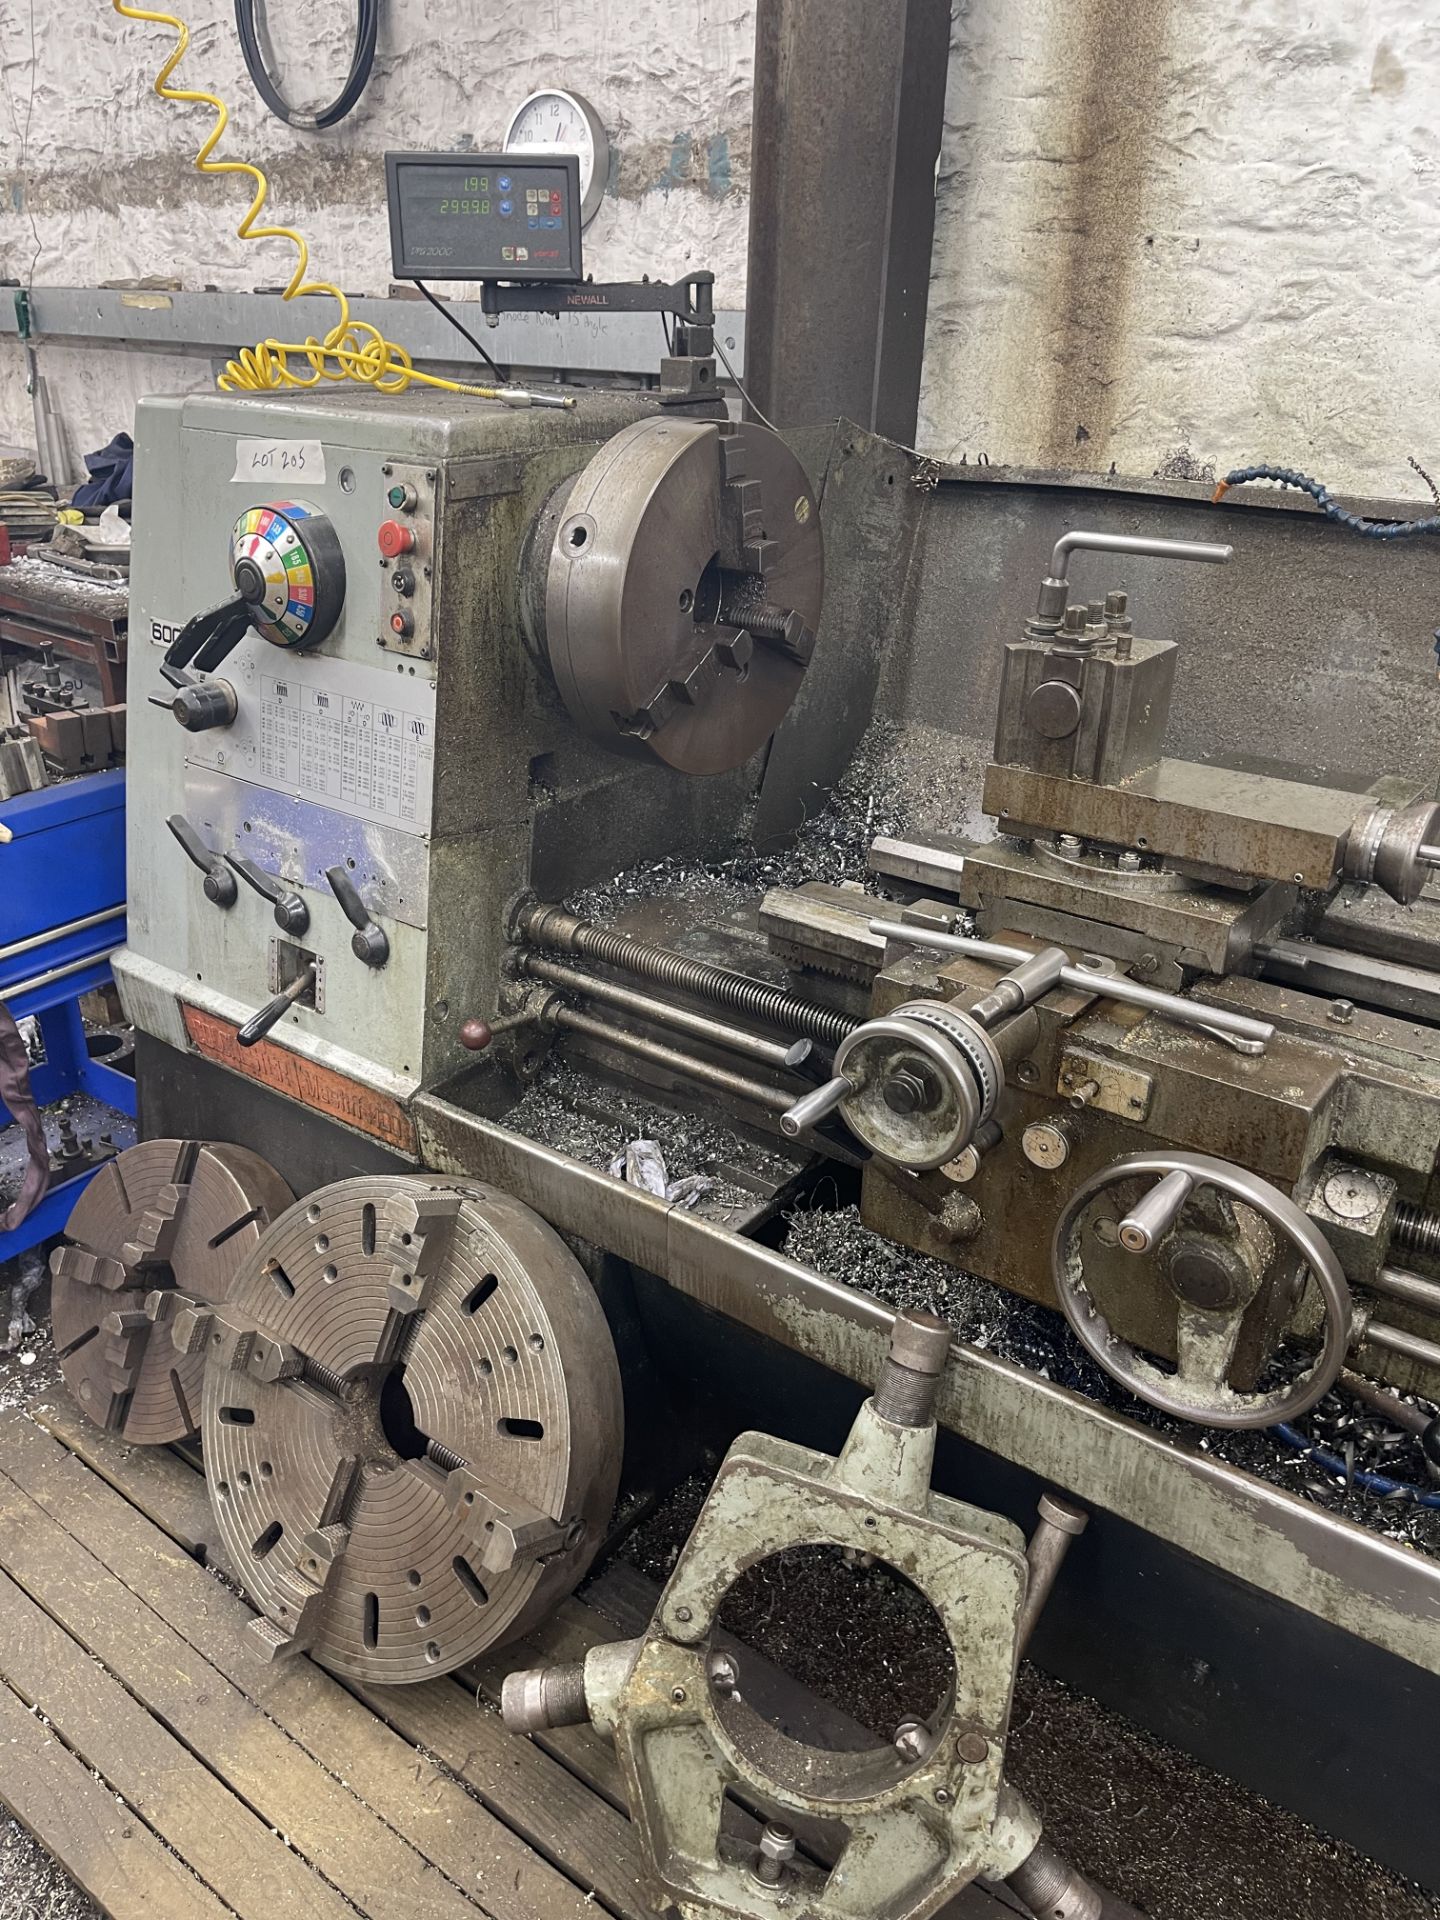 Colchester Mastiff 1400 GAP BED LATHE, taper turning, 3 and 4 jaw chucks, face plate, fixed - Image 4 of 4